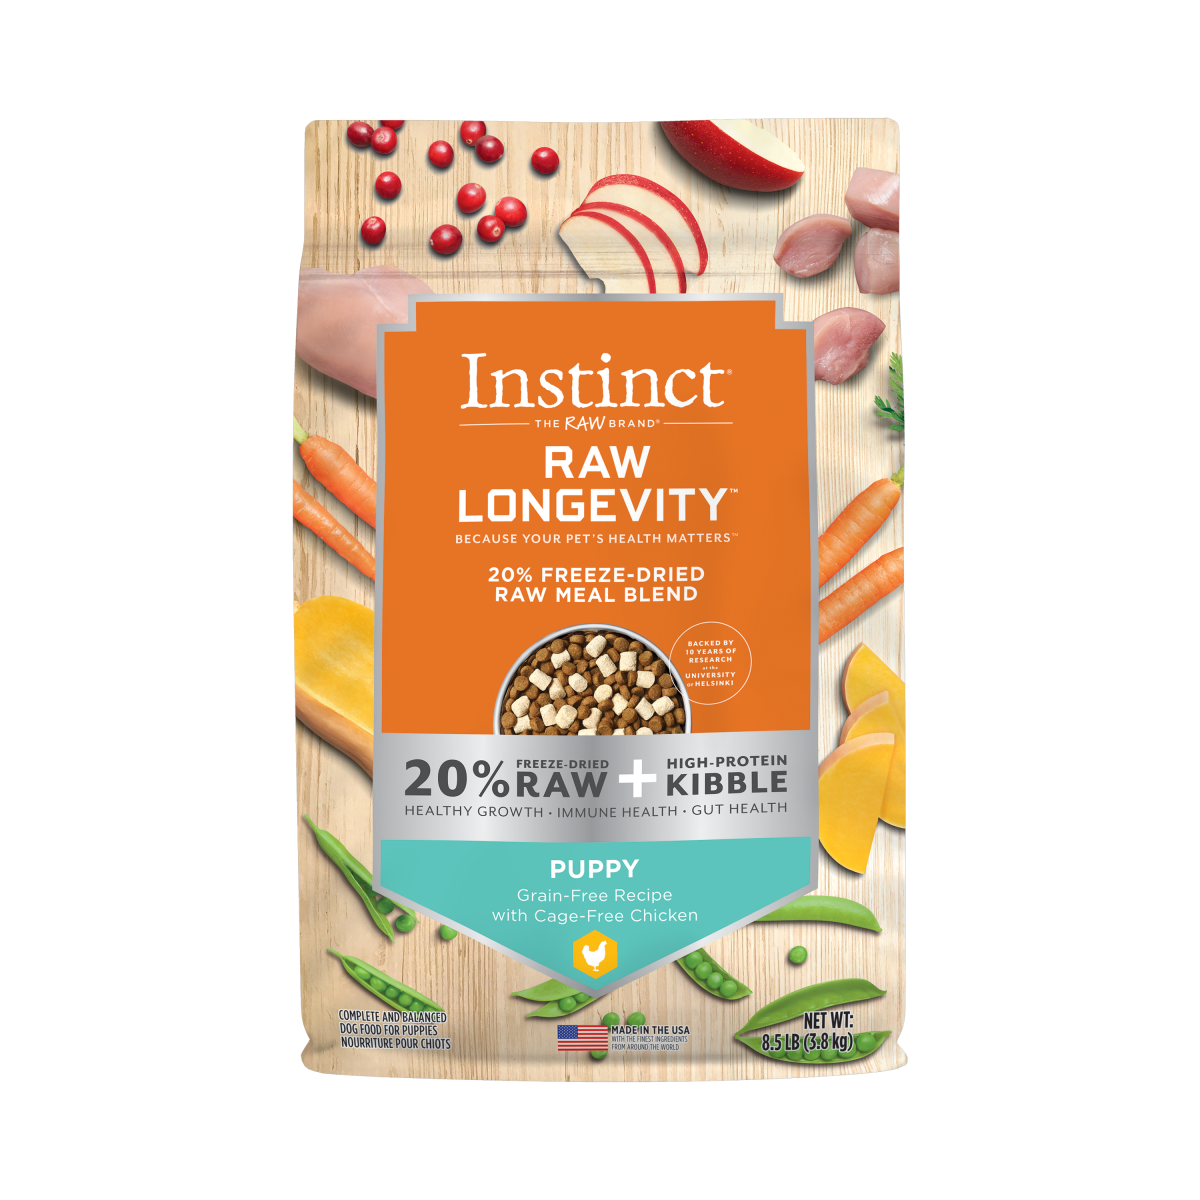 Instinct - Raw Longevity 20% Freeze-Dried Raw Meal Blend Cage-Free Chicken Recipe (For Puppies)